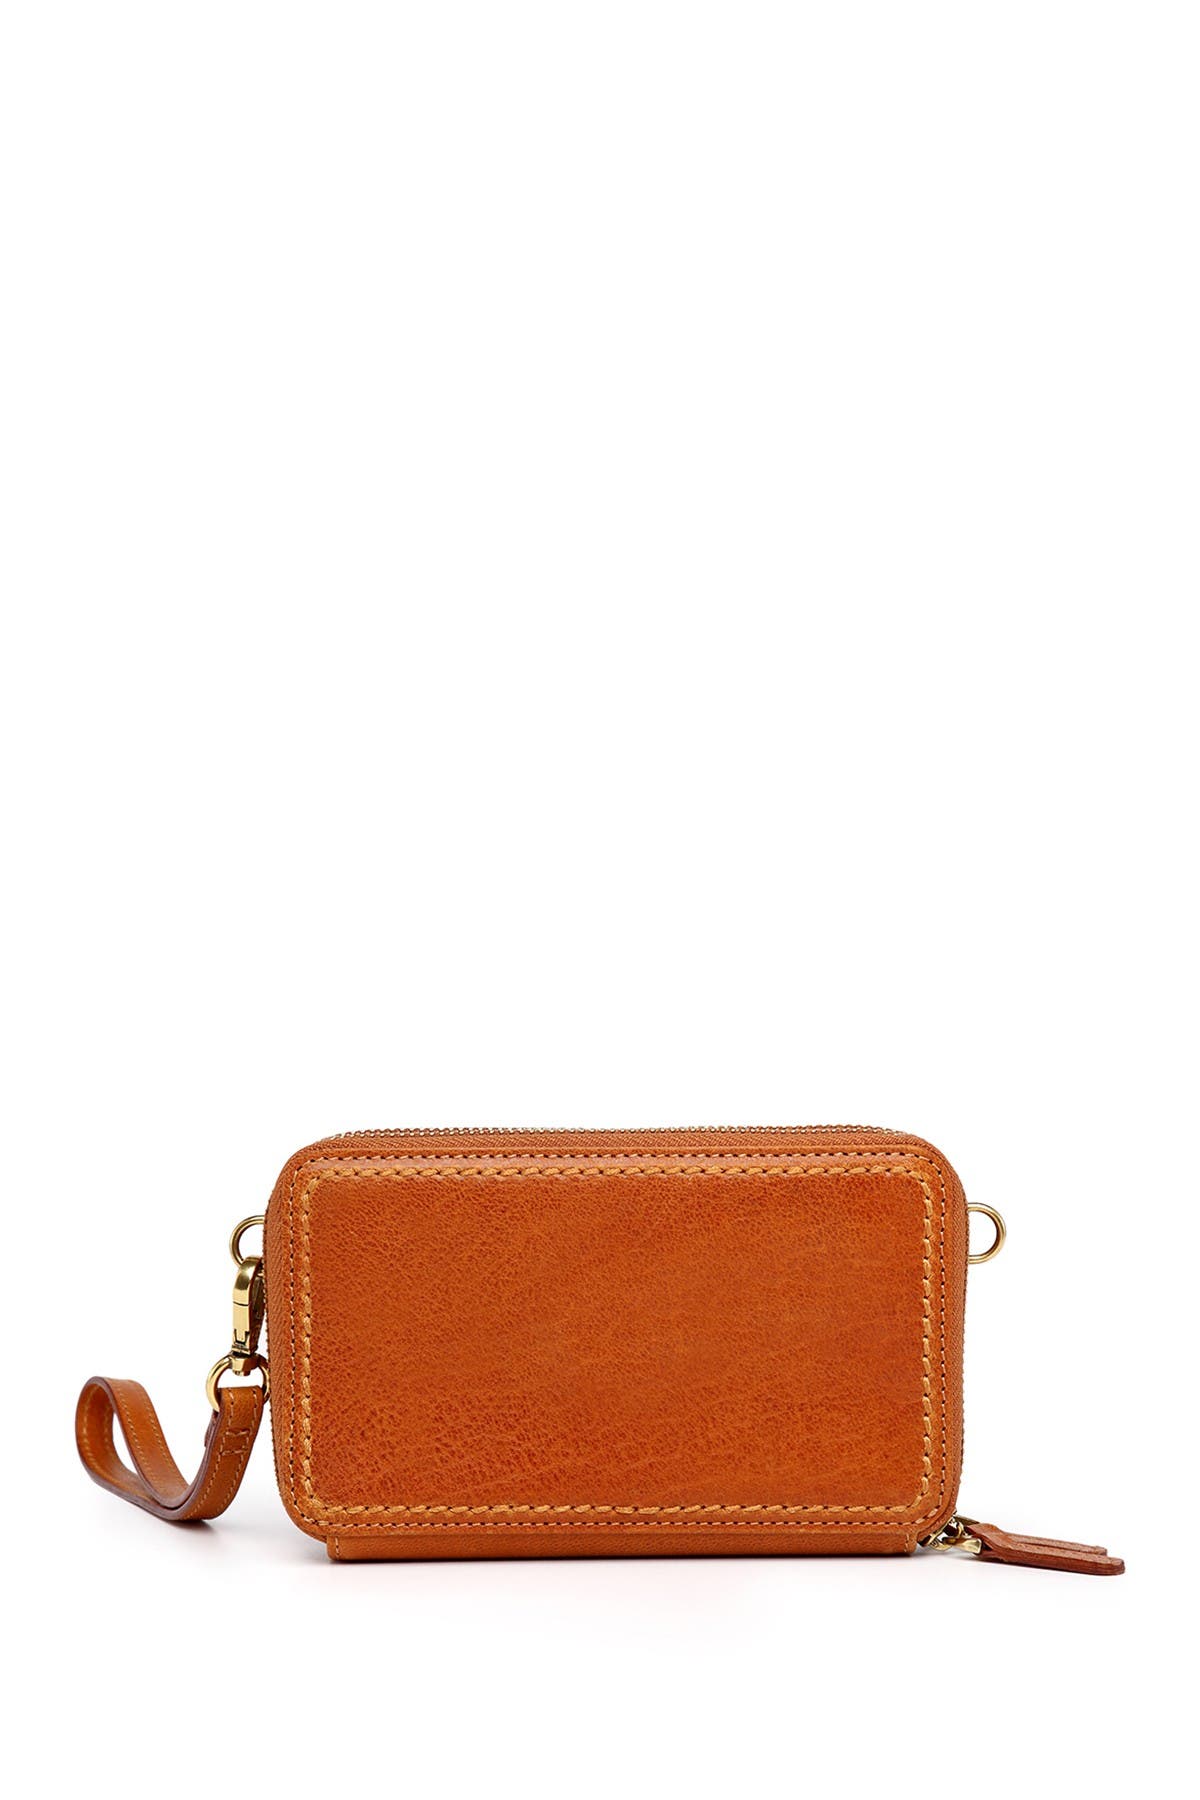 Old Trend Leather Convertible Crossbody Bag In Open Orange10